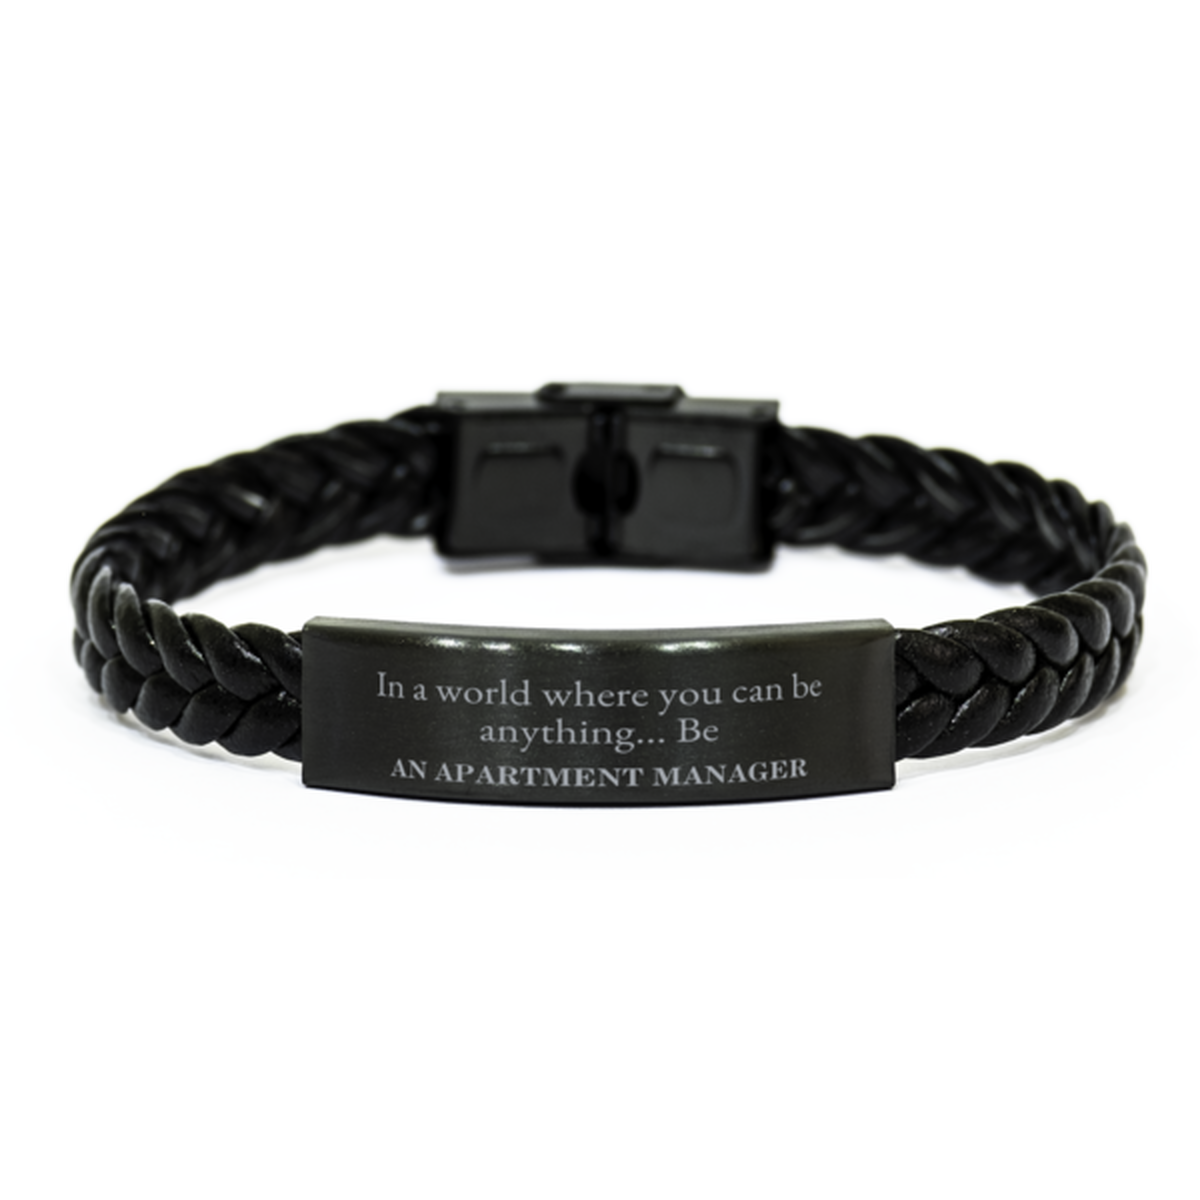 Gifts for Apartment Manager, In a world where you can be anything, Appreciation Birthday Braided Leather Bracelet for Men, Women, Friends, Coworkers